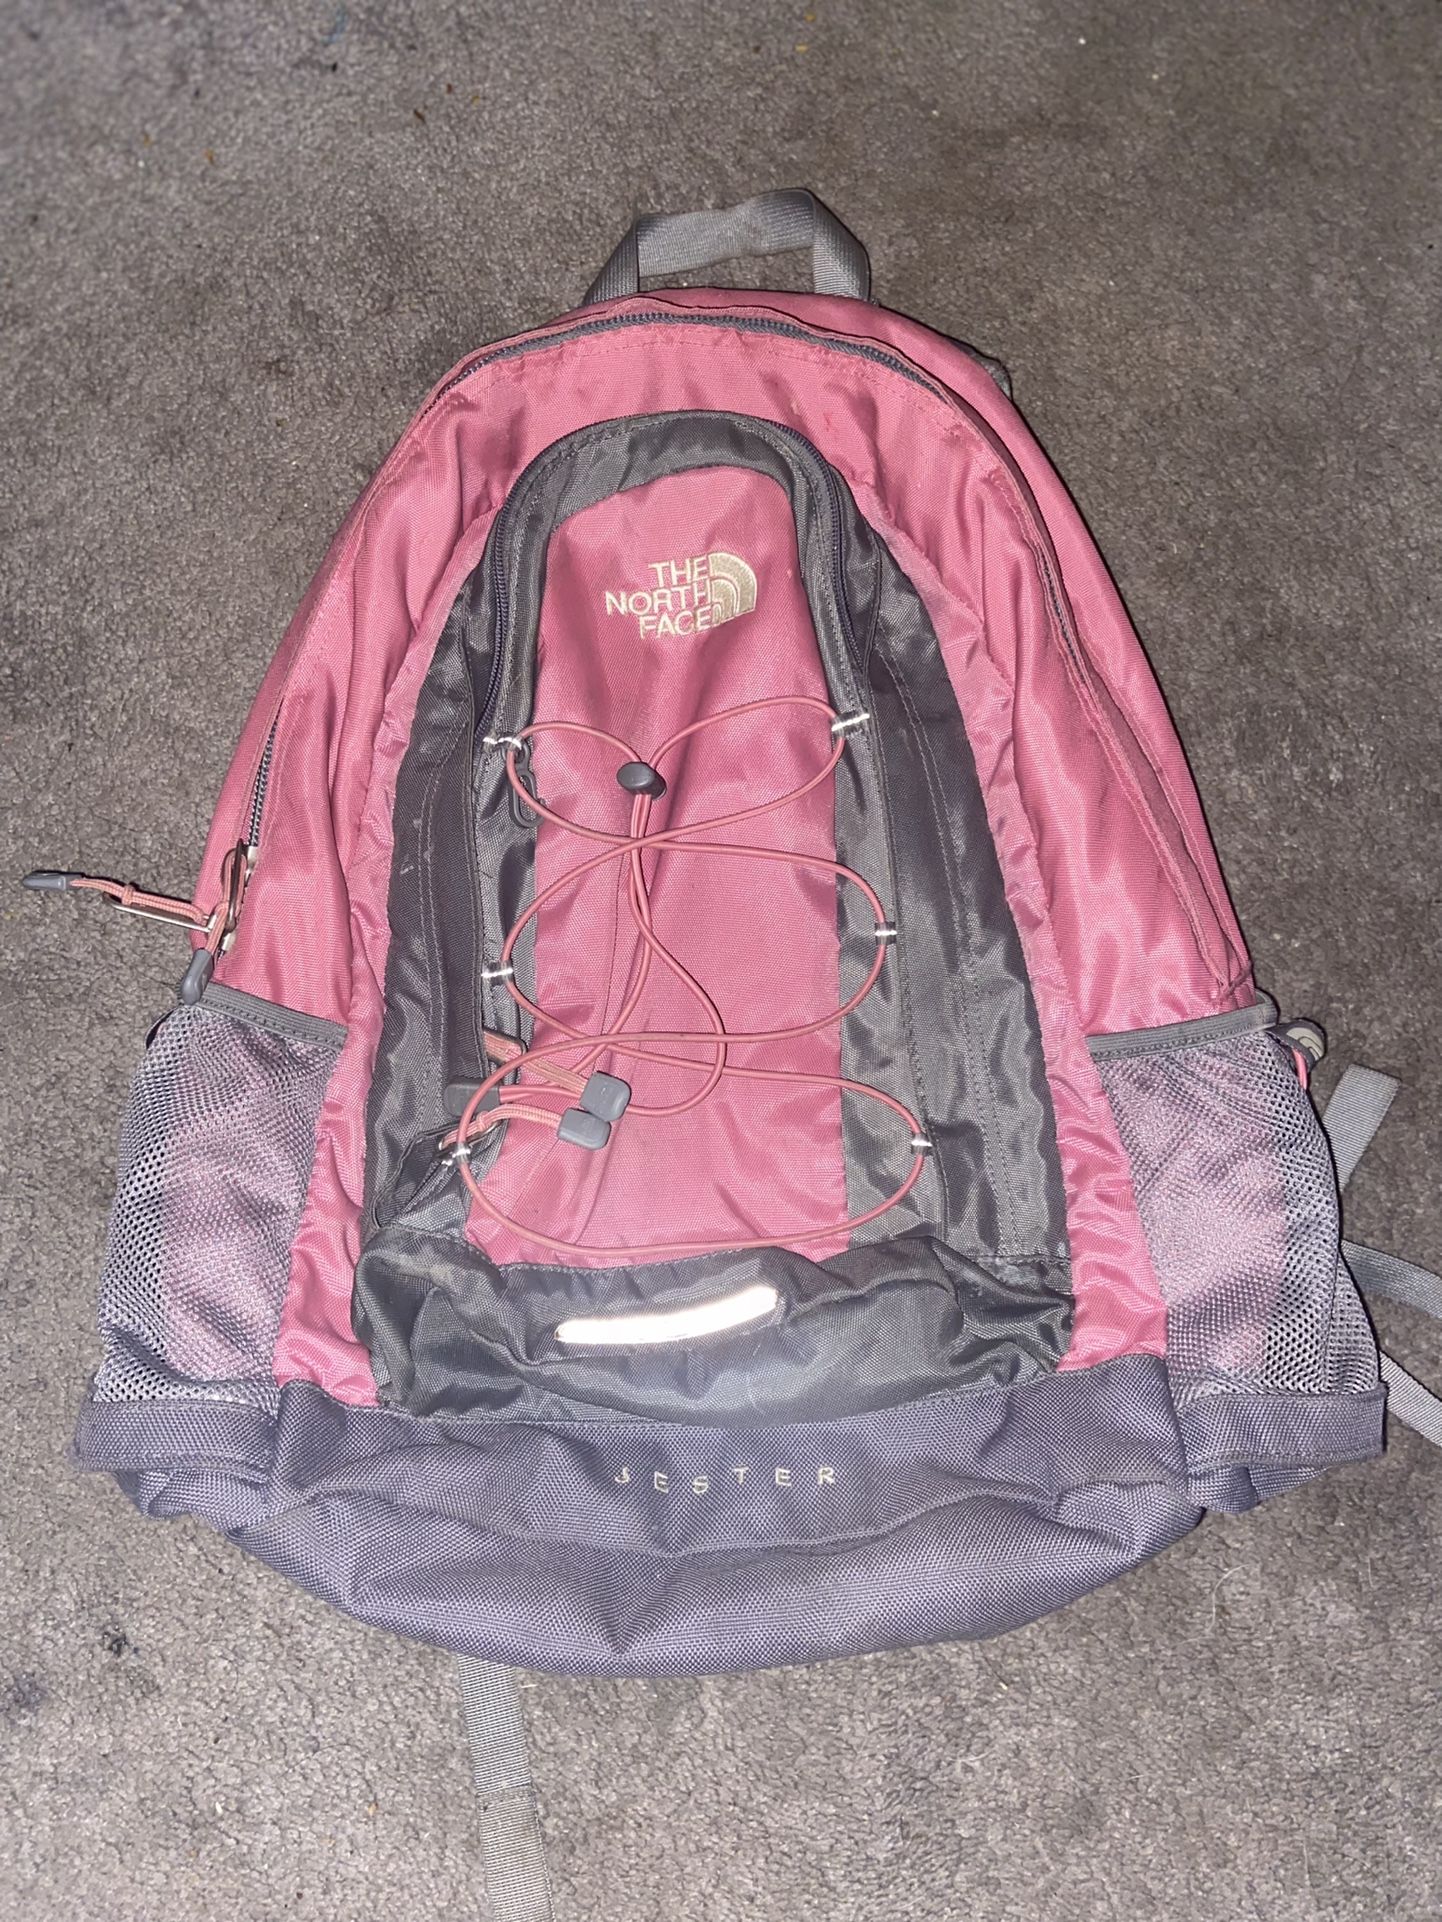 The North Face Jester Pink Bookbag